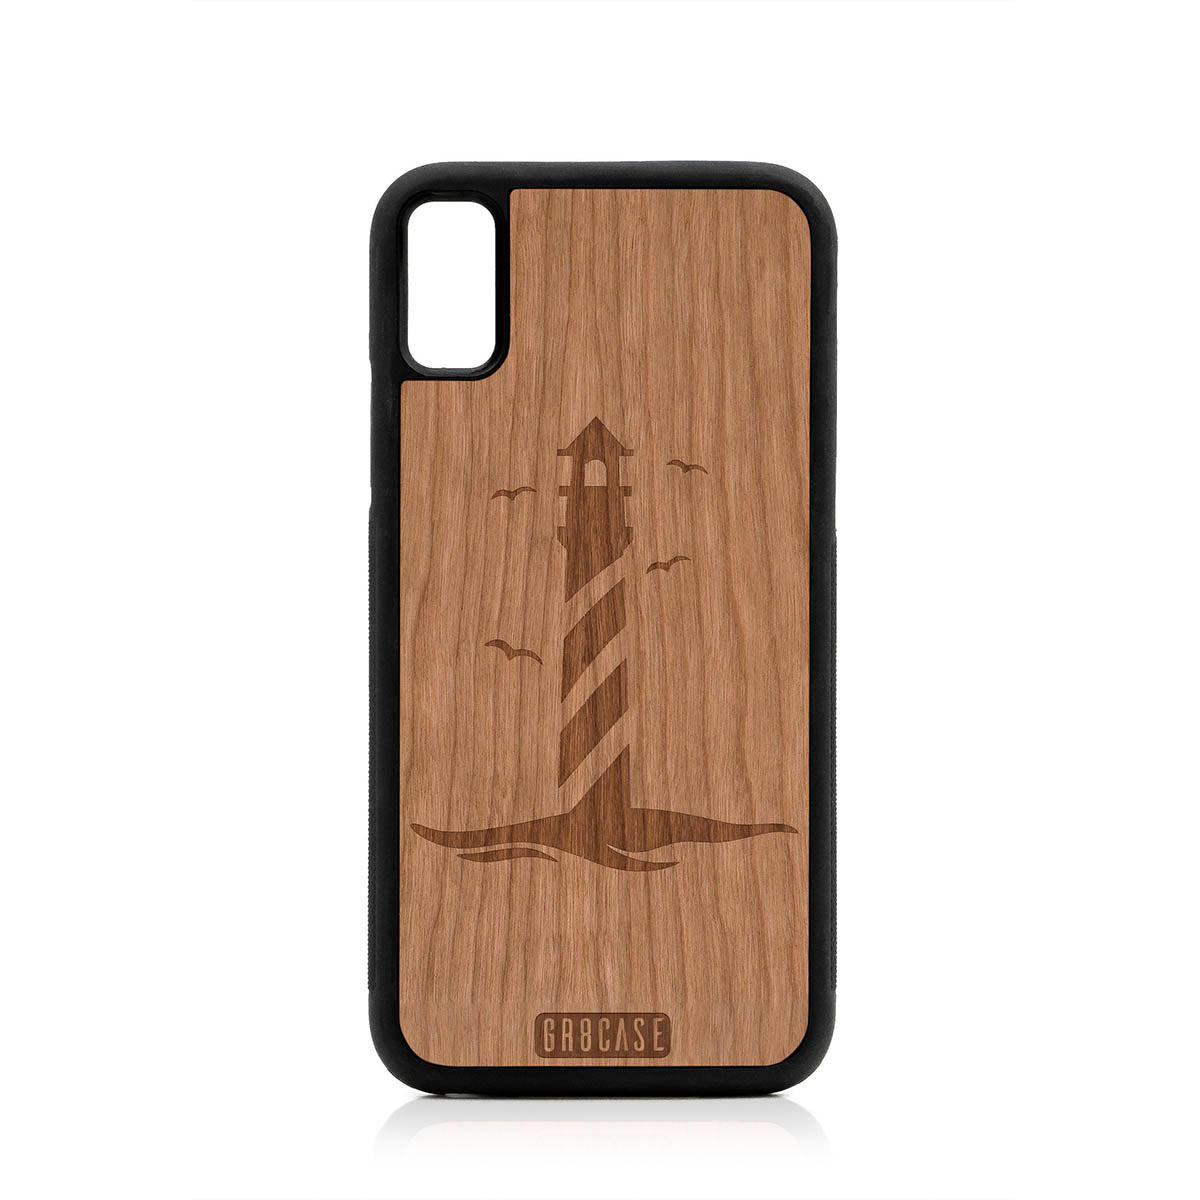 Lighthouse Design Wood Case For iPhone XS Max